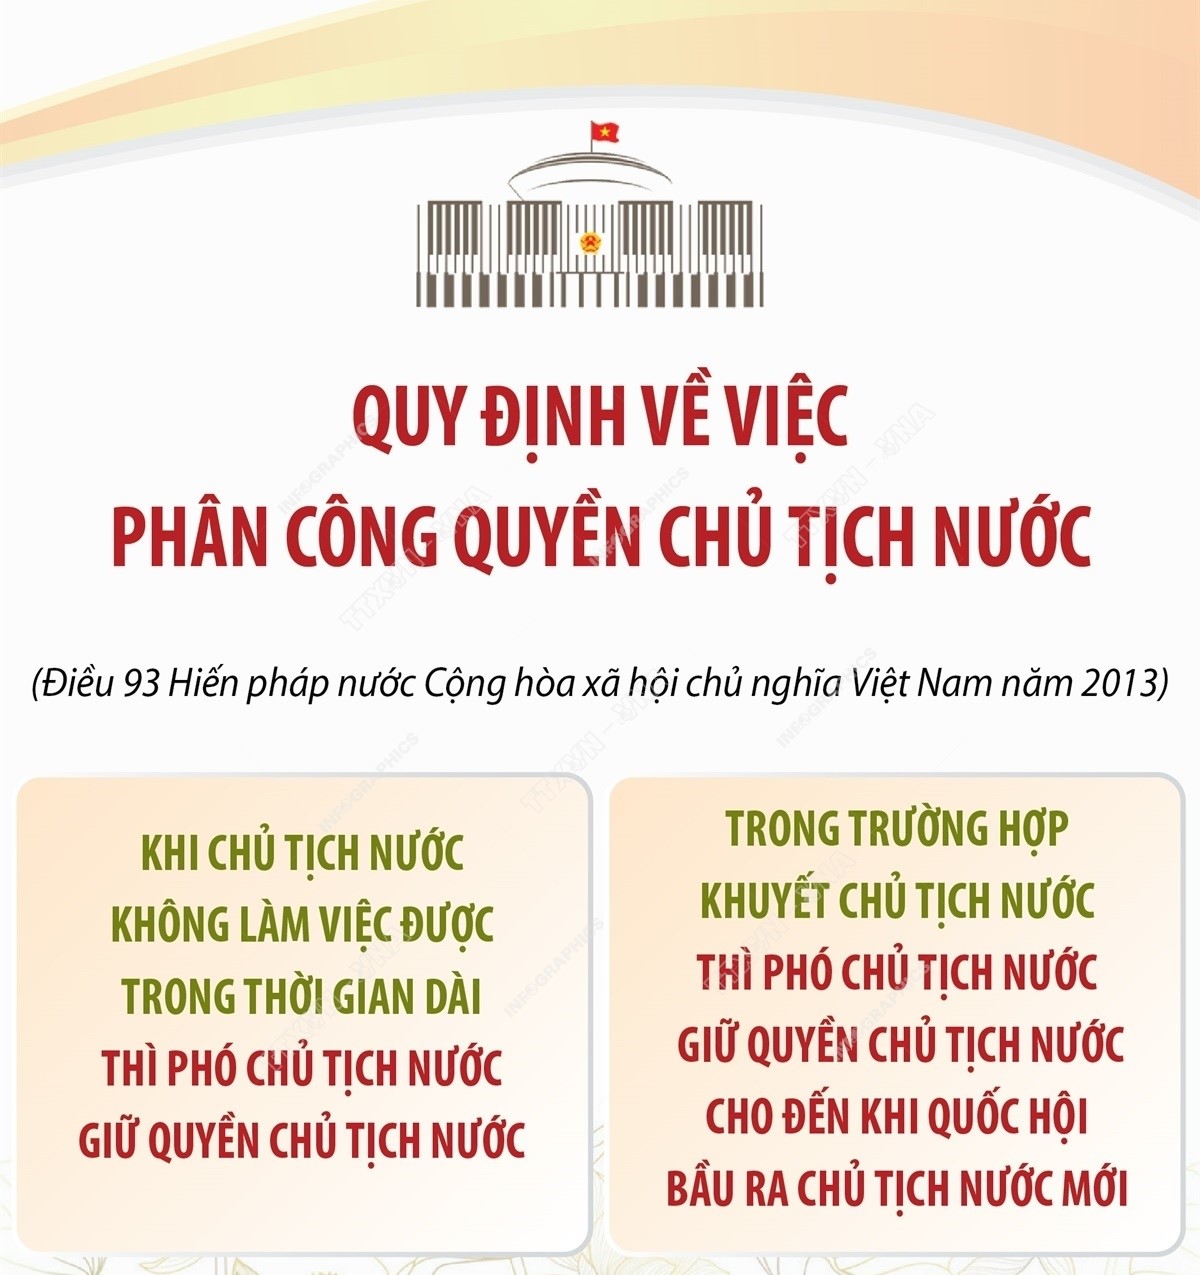 PCT-nuoc-Anh-Xuan-quydinh.jpg